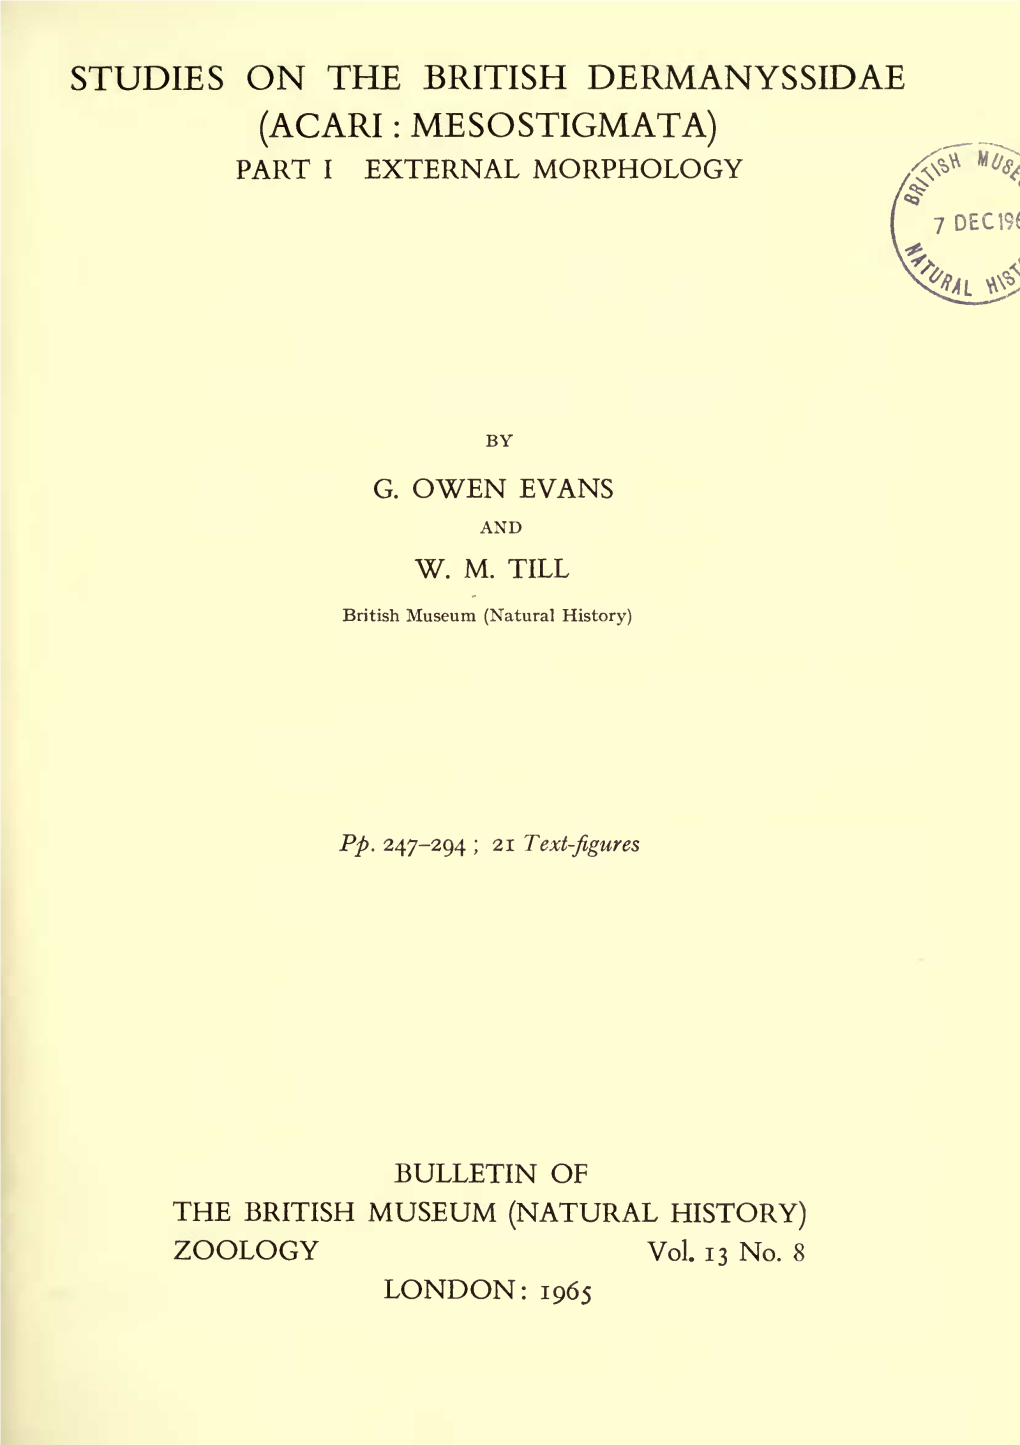 BULLETIN of the BRITISH MUSEUM (NATURAL HISTORY) ZOOLOGY Vol